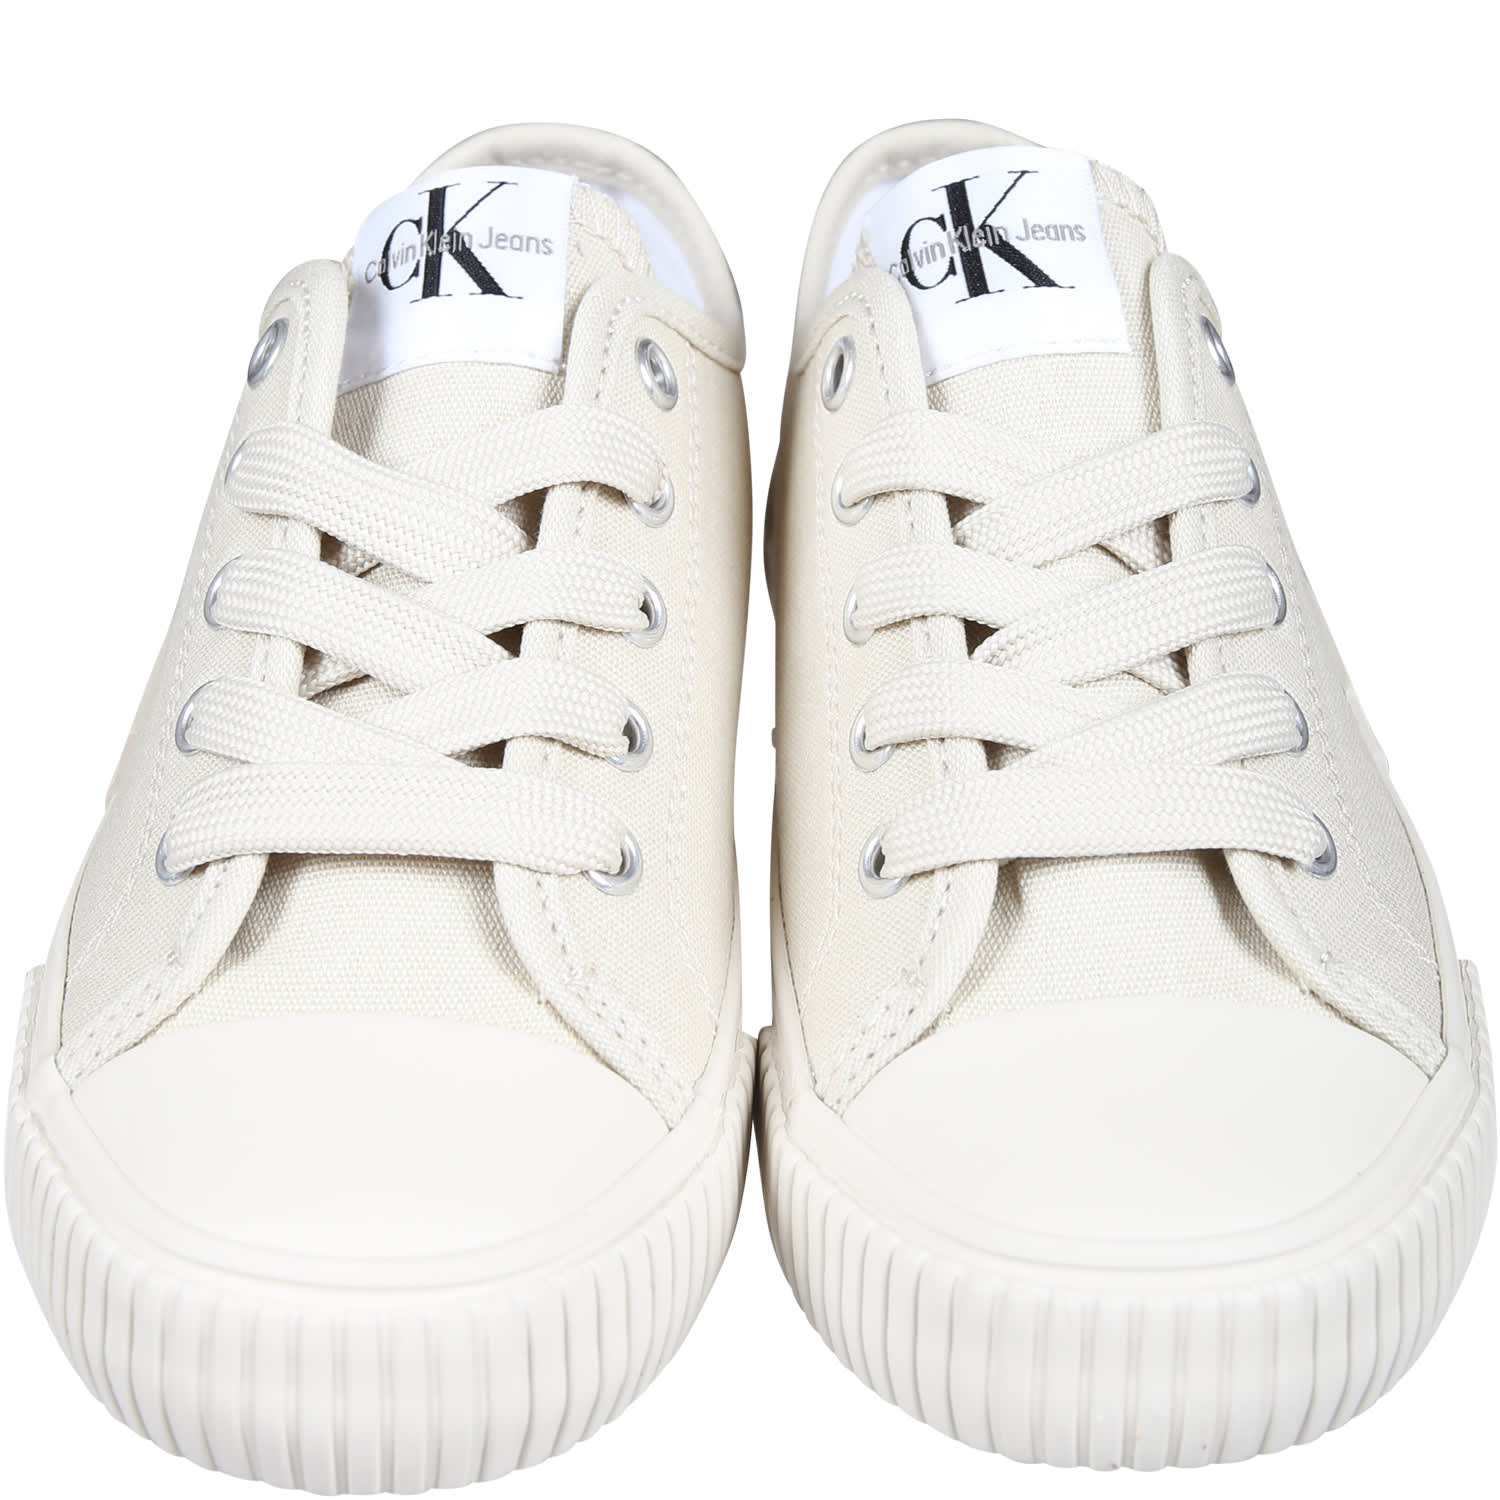 Shop Calvin Klein Ivory Sneakers For Kids With Logo